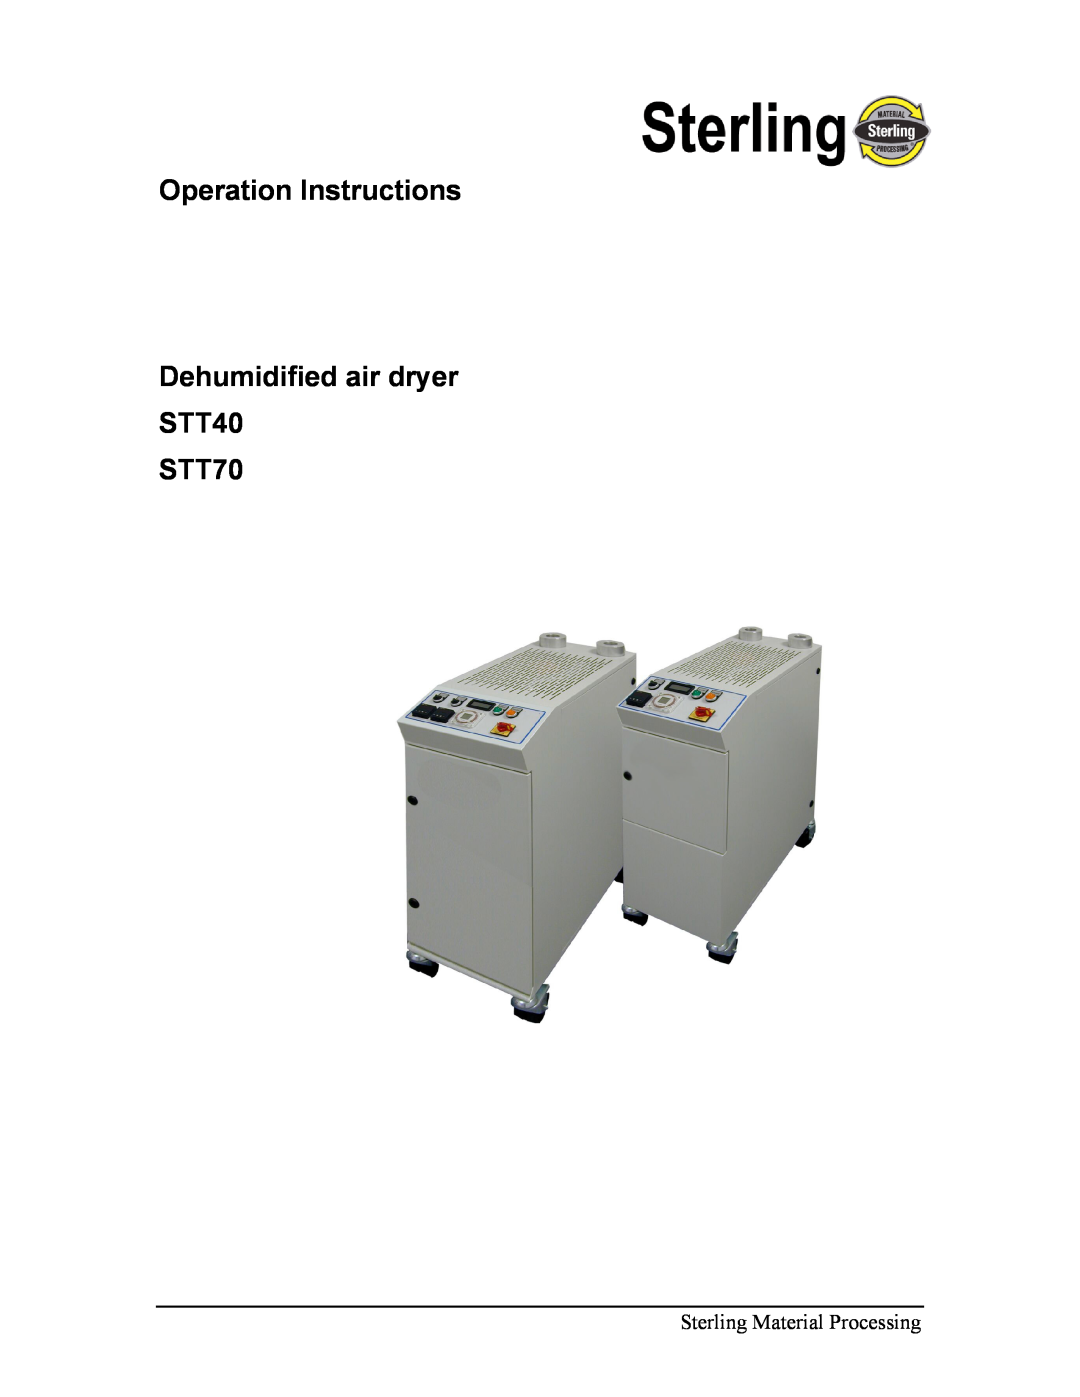 Sterling manual Operation Instructions, Dehumidified air dryer STT40 STT70, Sterling Material Processing 